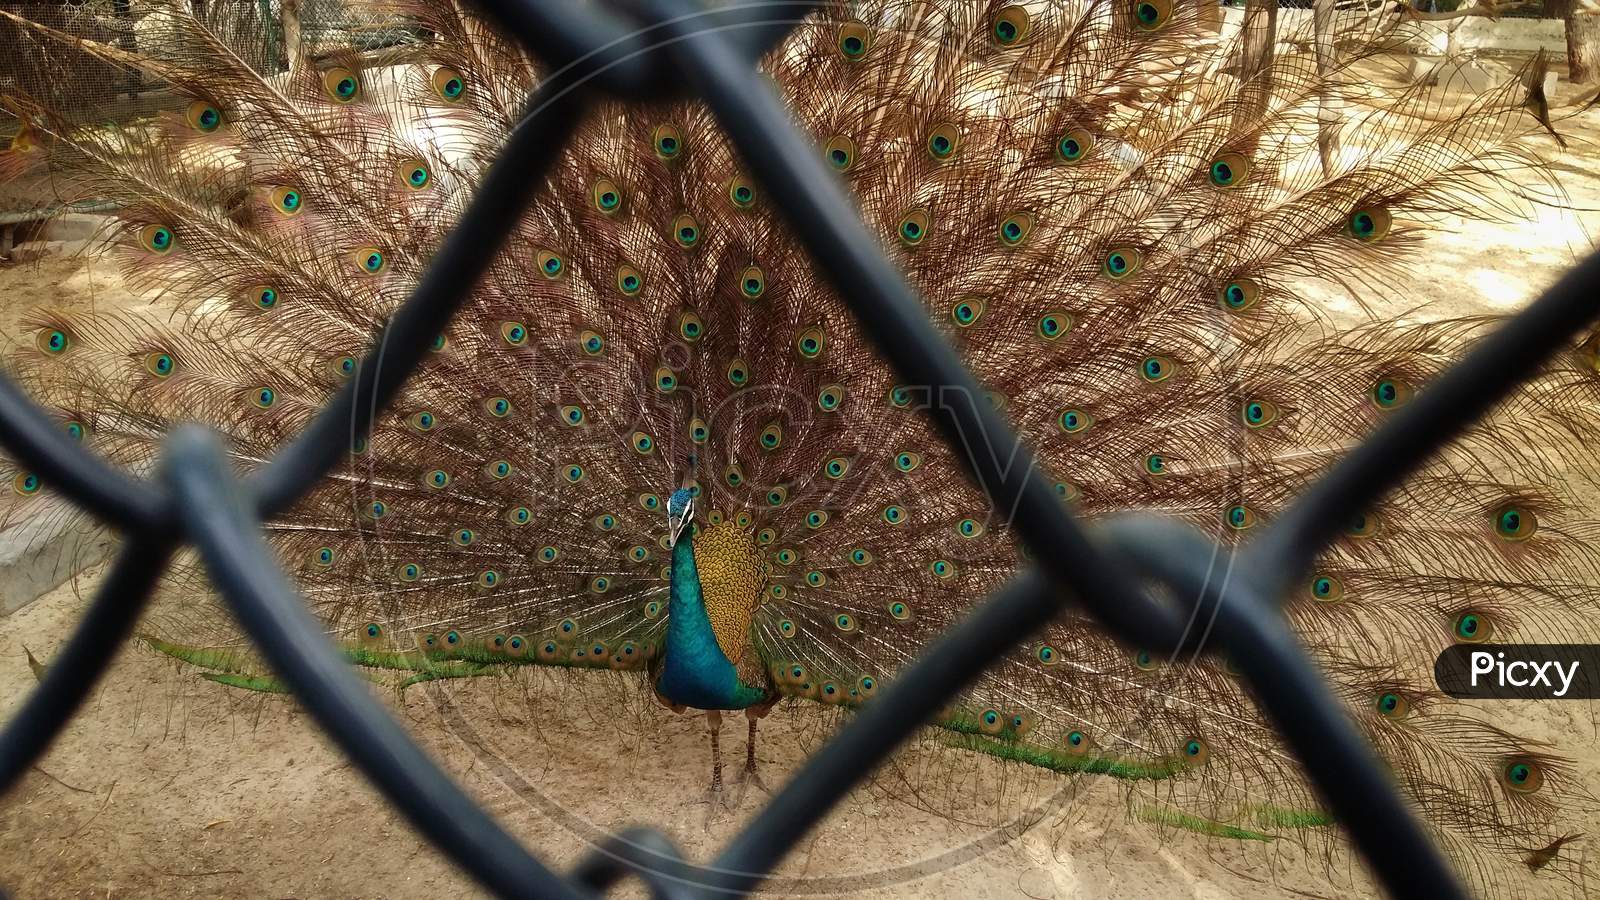 A Beautiful Peacock Behind The Cage.